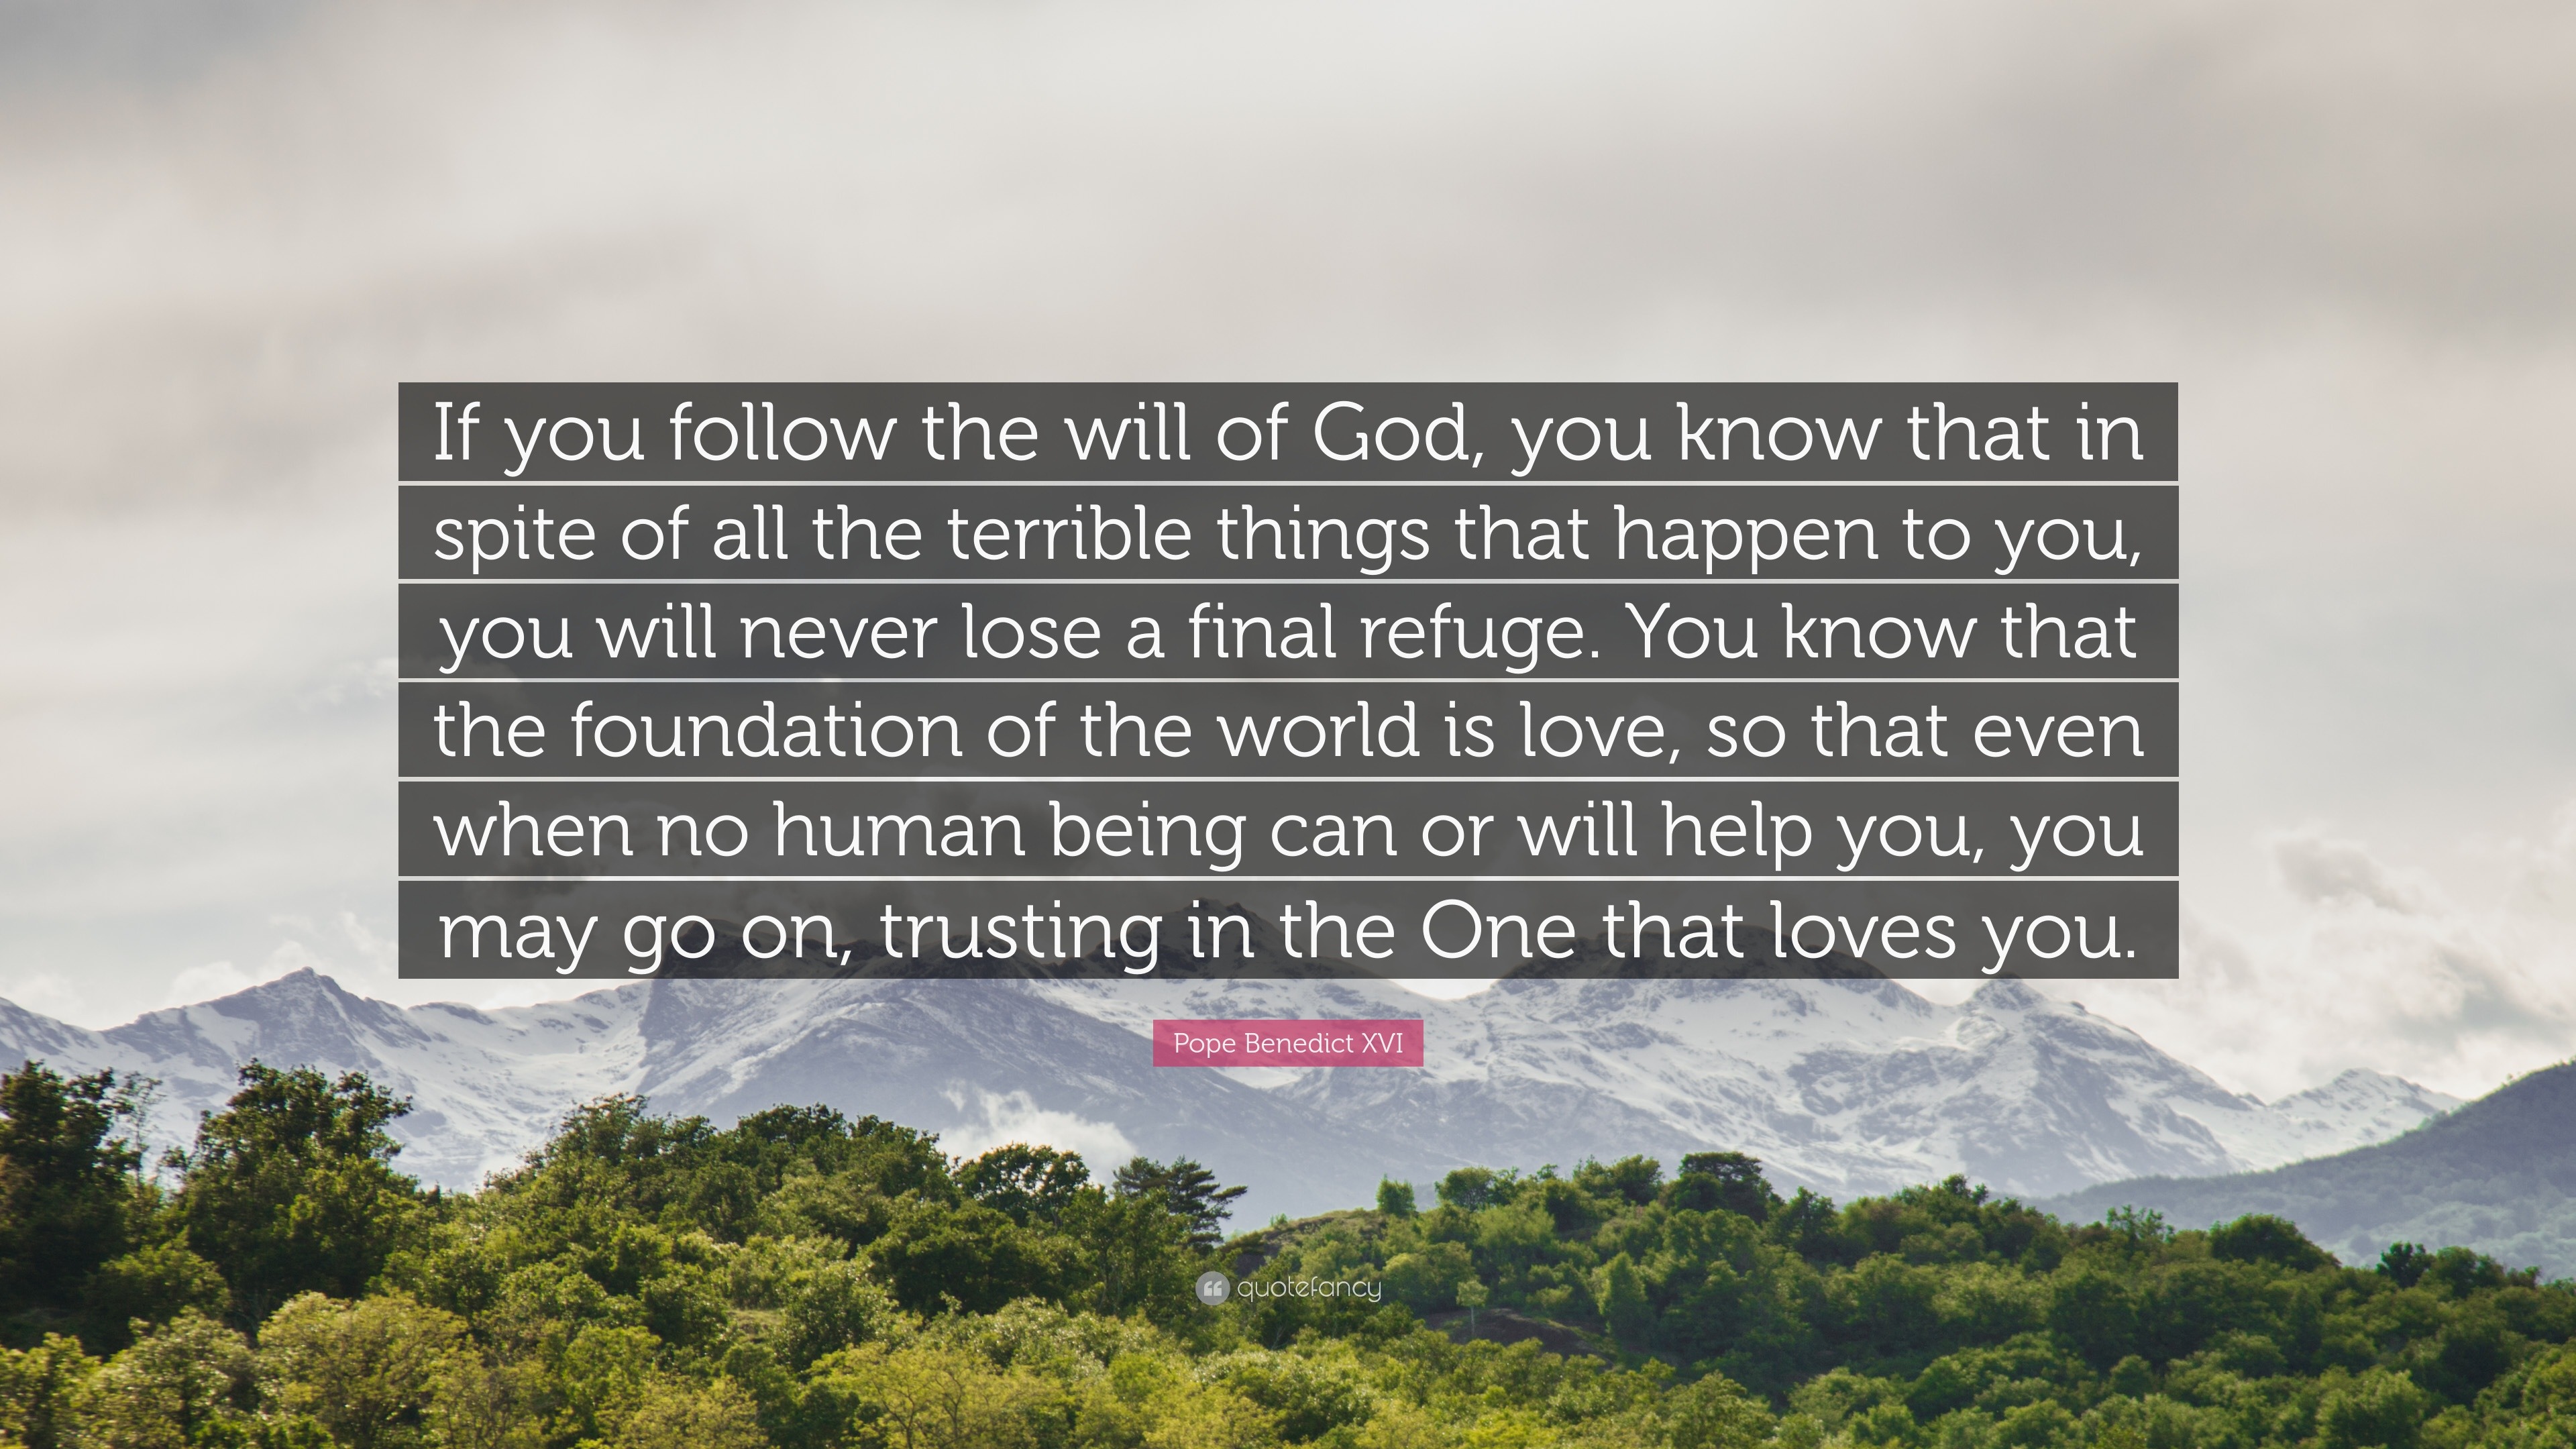 Pope Benedict XVI Quote “If you follow the will of God you know